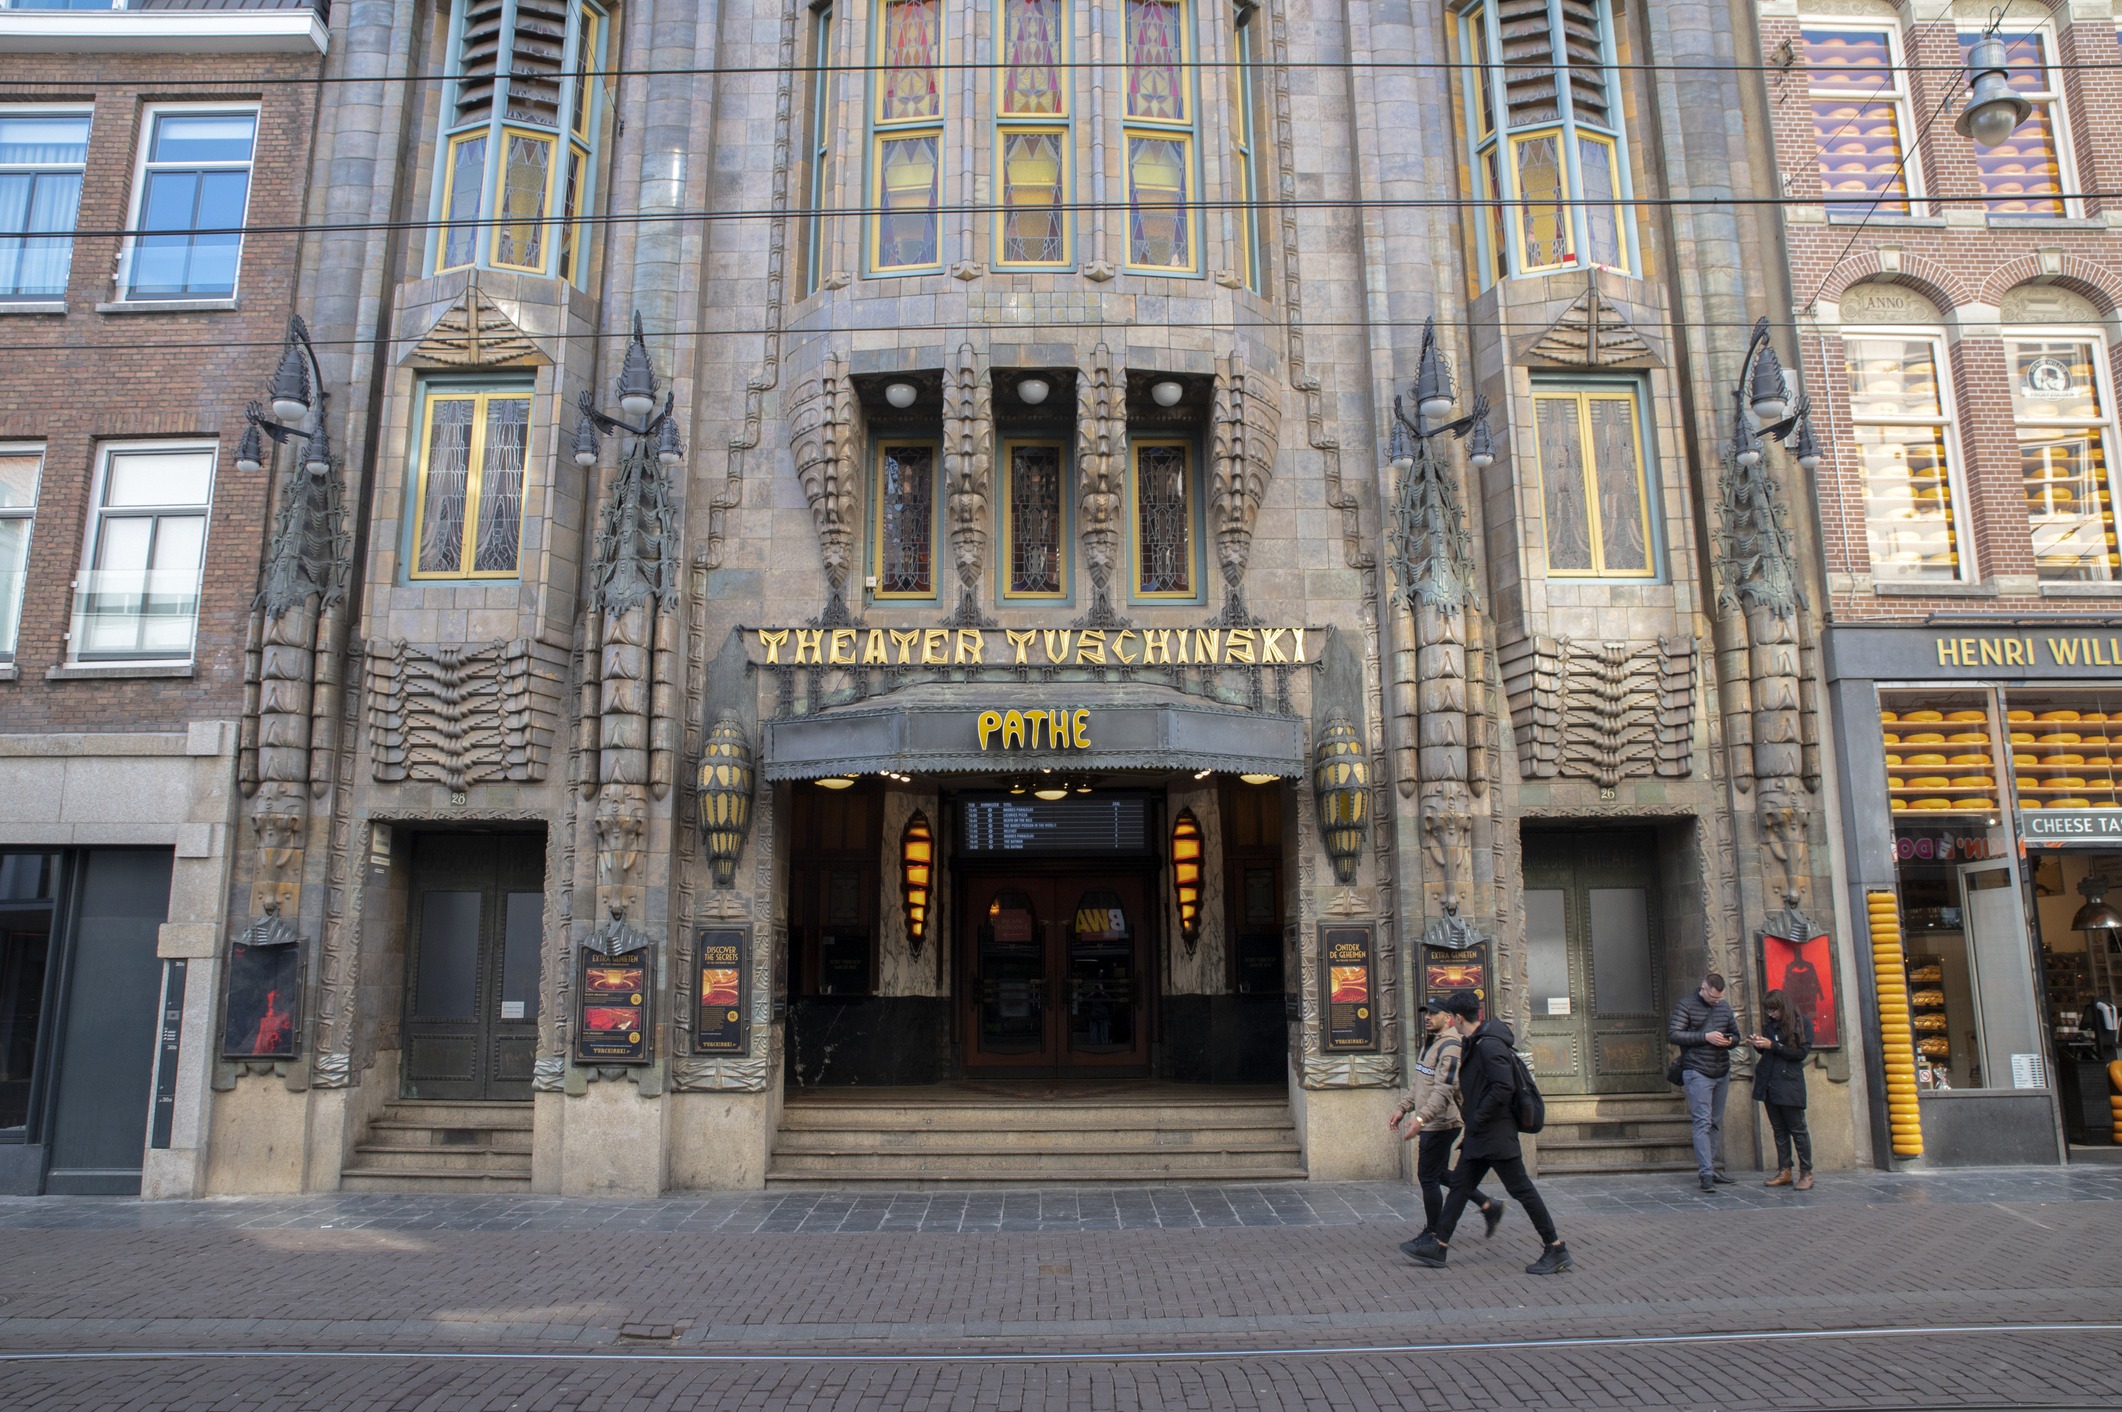 History of the New Amsterdam Theater